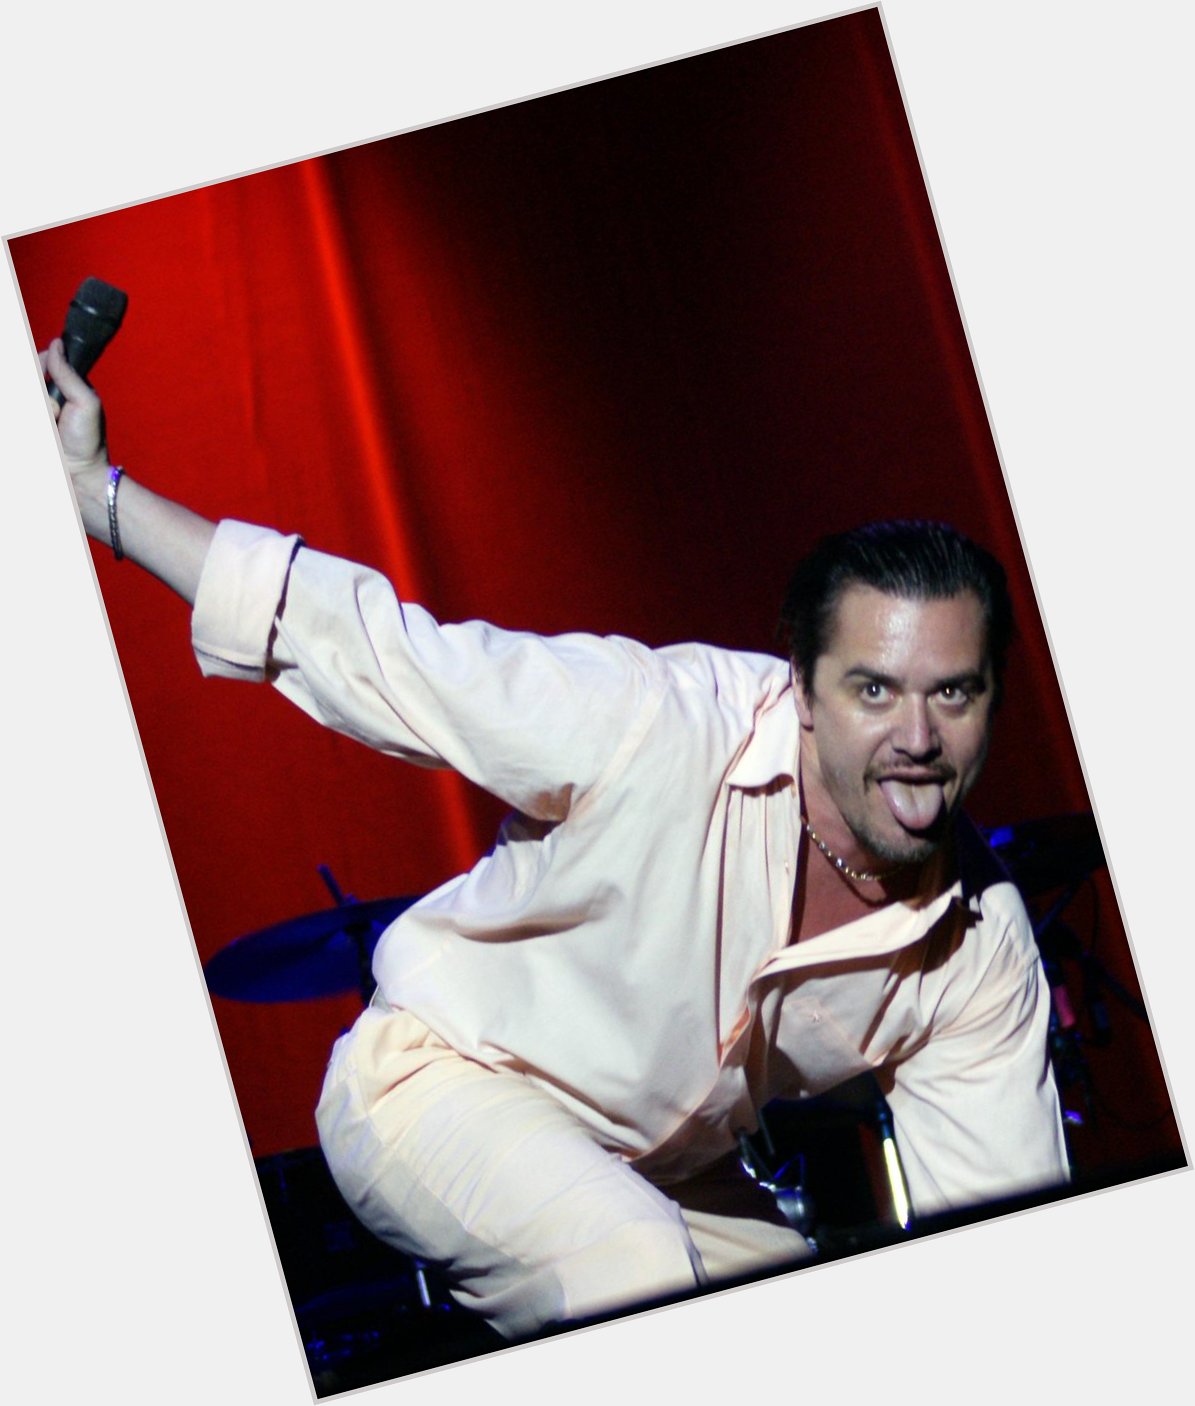 HAPPY BIRTHDAY MIKE PATTON! frontman is 47 today  photo by me BBKLive 2010 